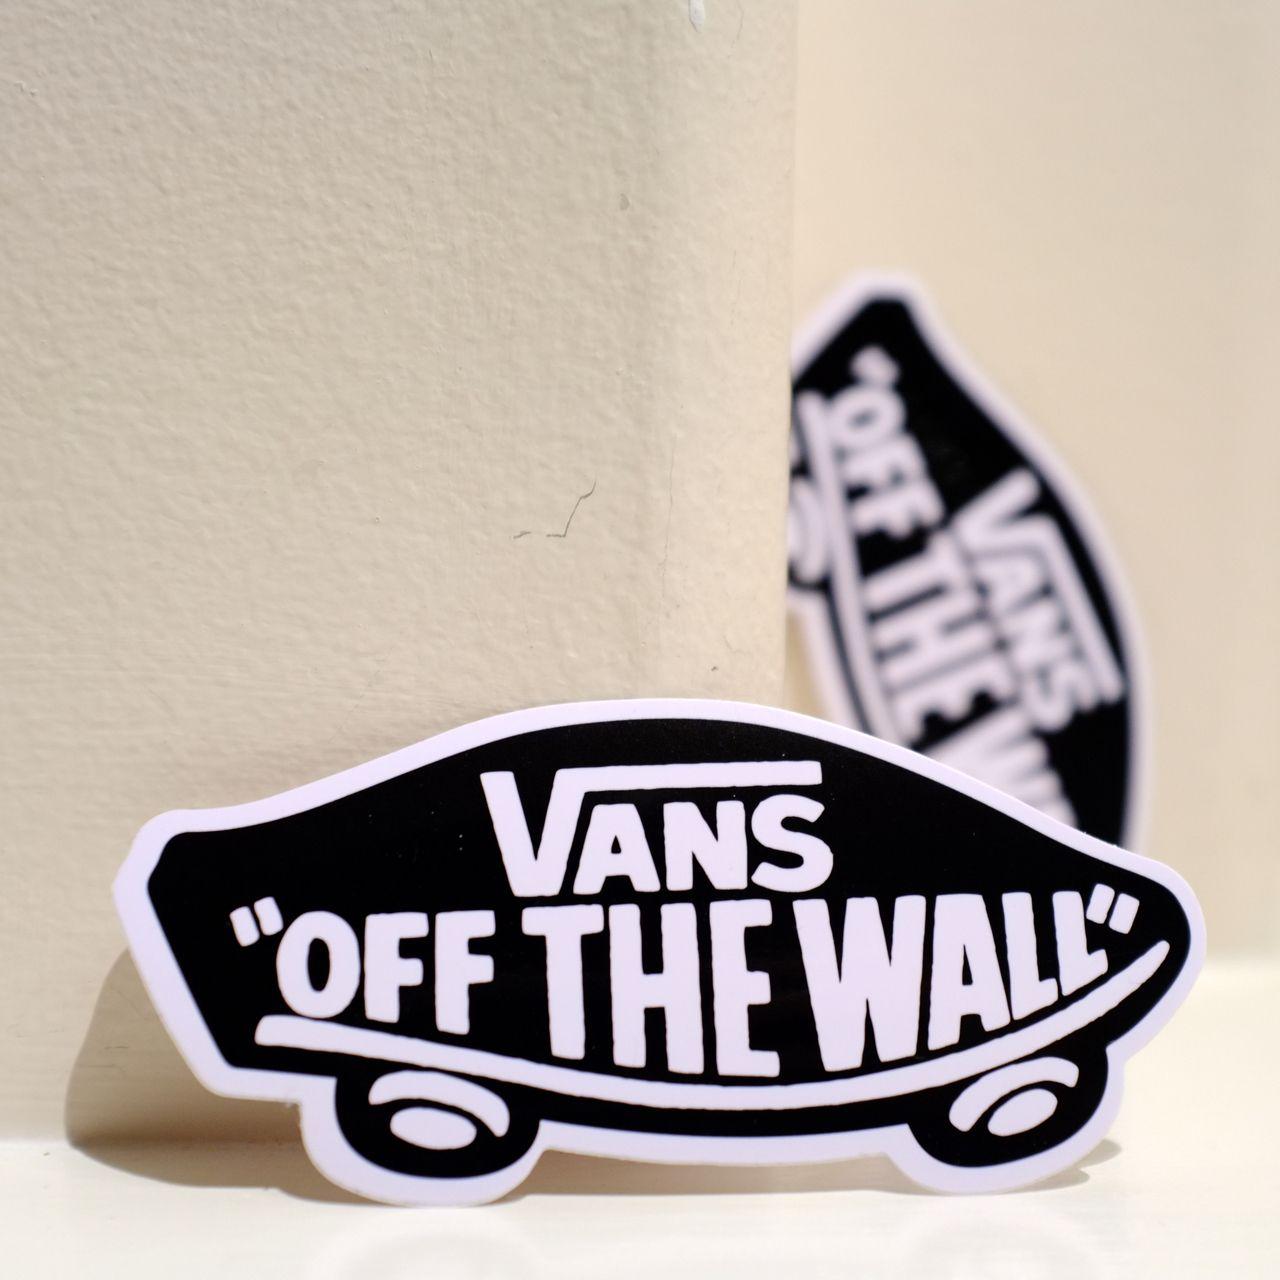 Off the Wall Logo - Black VANS OFF THE WALL Logo Shop Display 4x2 Decal Sticker